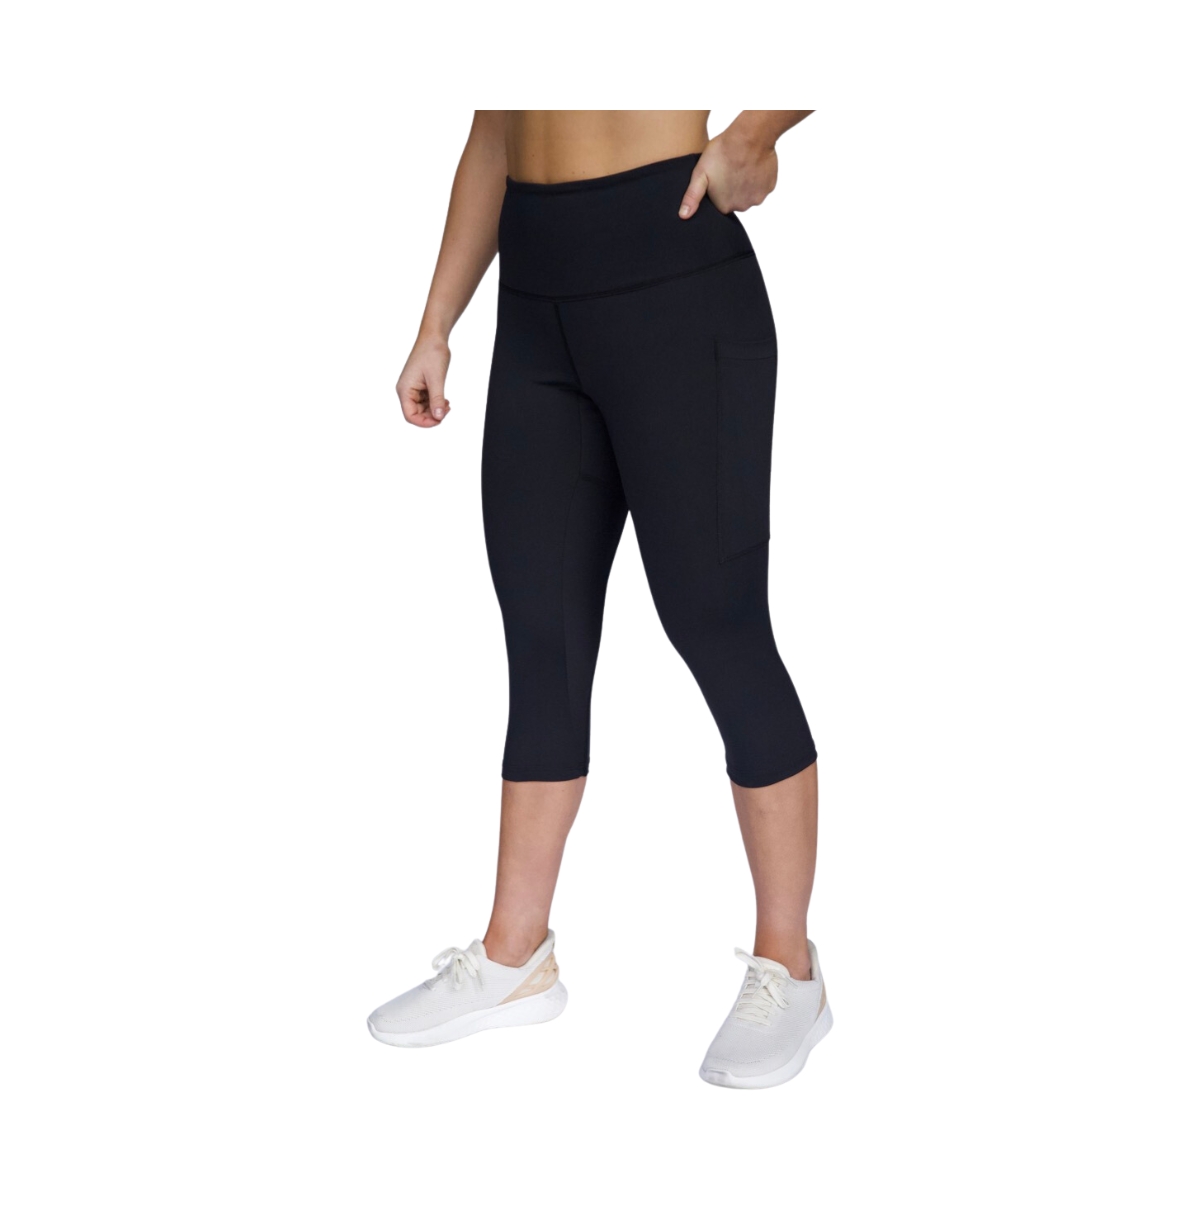 Women's Leakproof Activewear Cropped Leggings For Bladder Leaks and Periods - Black